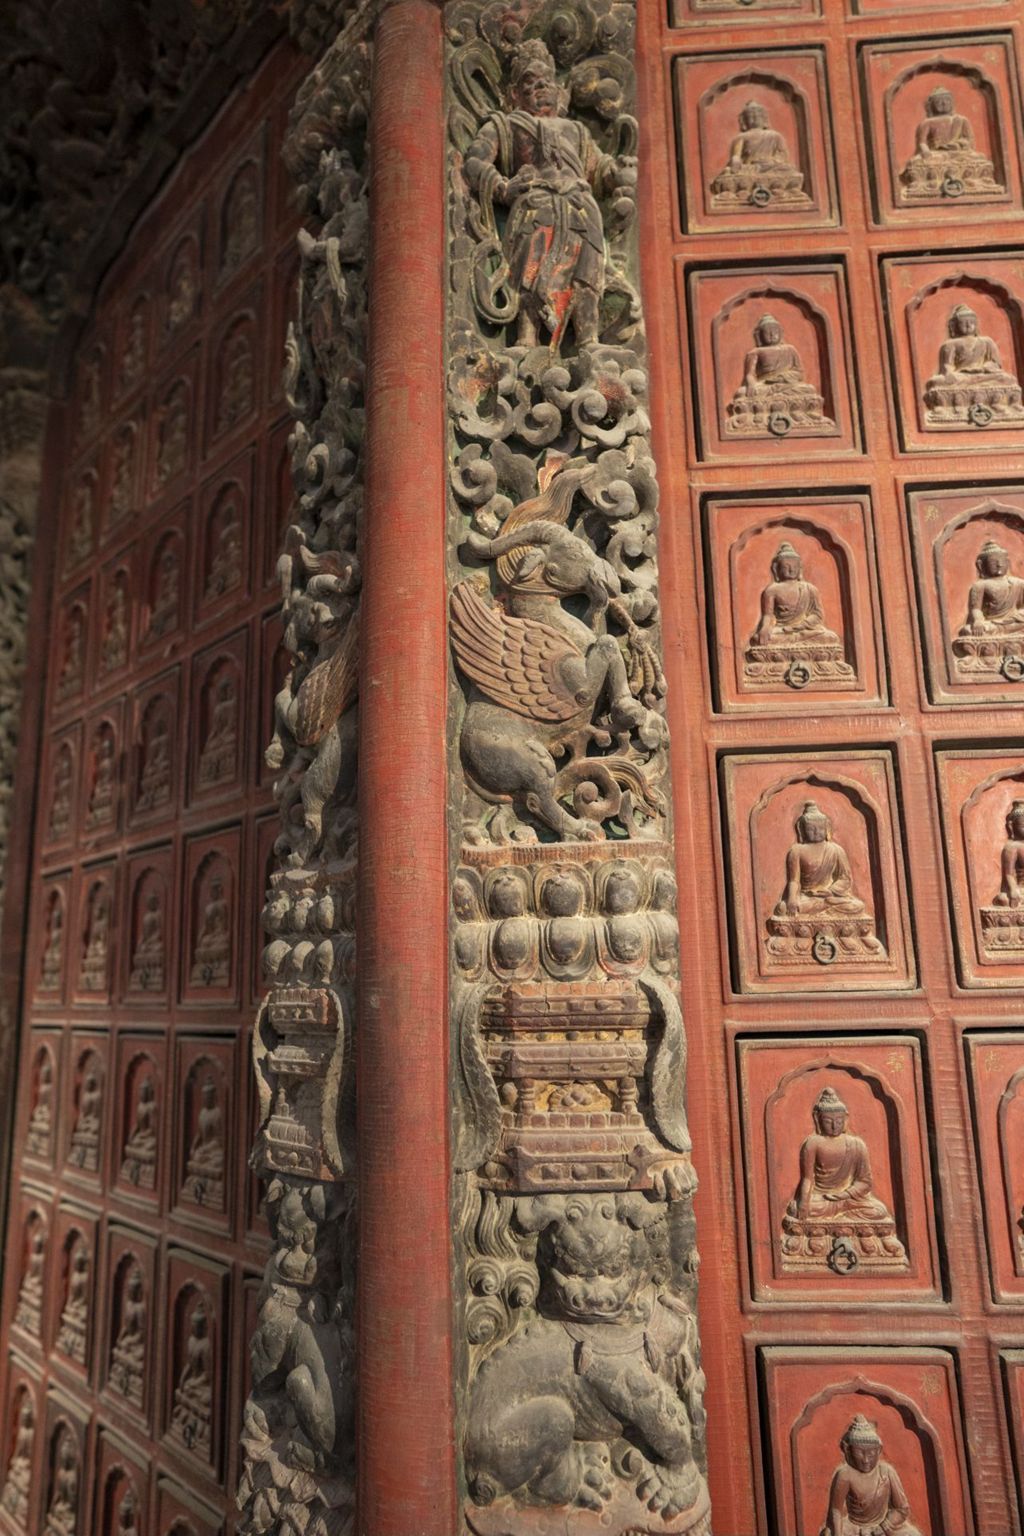 Miniature of Revolving Sutra Cabinet (Zhuanlun Jingzang, or Scripture Cabinet) in Sutra Hall (Zangdian, or Scripture Hall), elephant figure